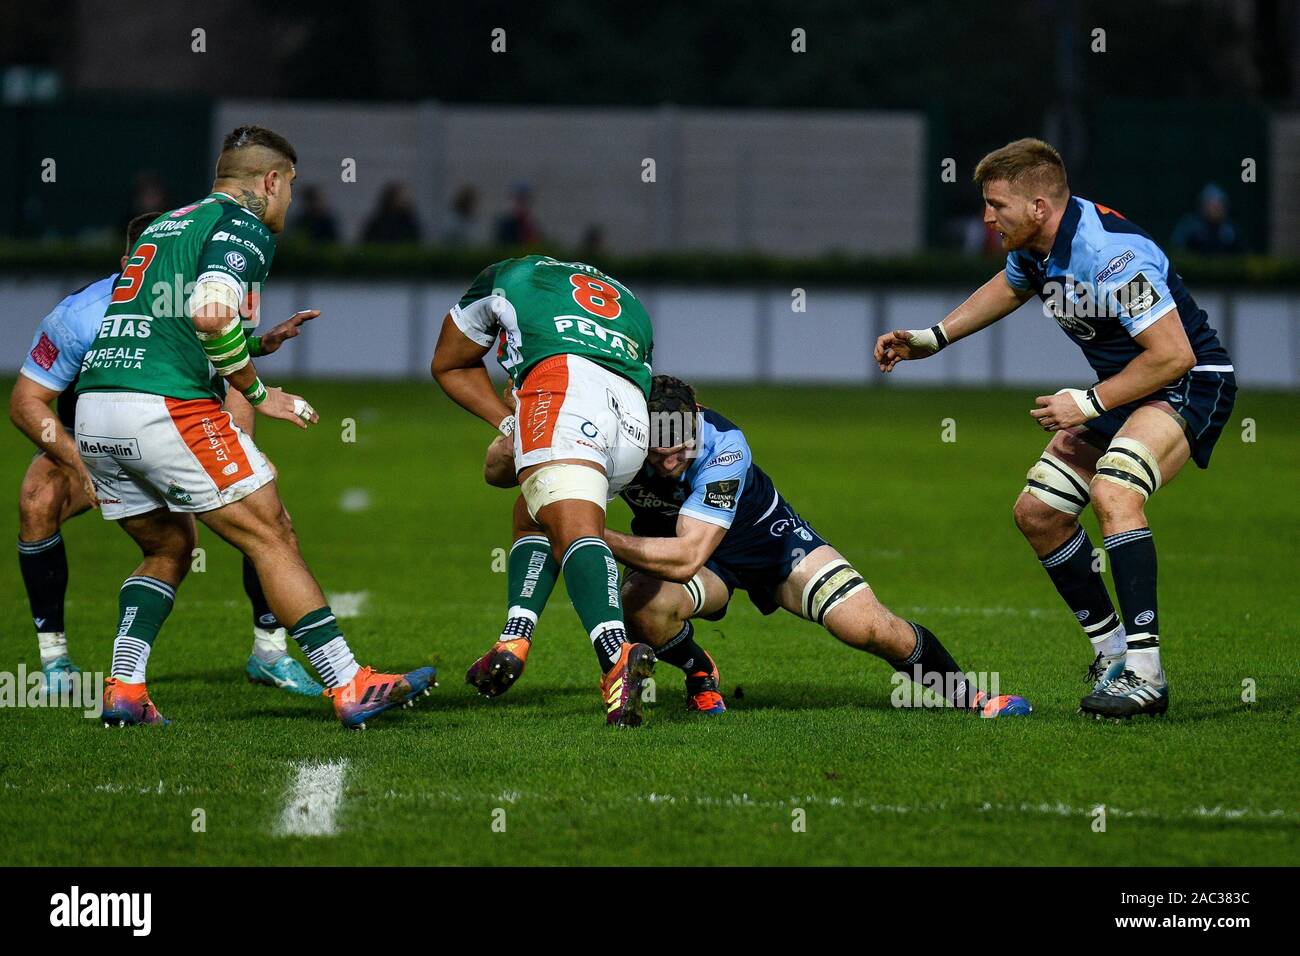 Treviso, Italy. 30th Nov, 2019. tackle of james ratti (cardiff) on toa  halafihi (benetton treviso) during Benetton Treviso vs Cardiff Blues -  Rugby Guinness Pro 14 - Credit: LPS/Ettore Griffoni/Alamy Live News